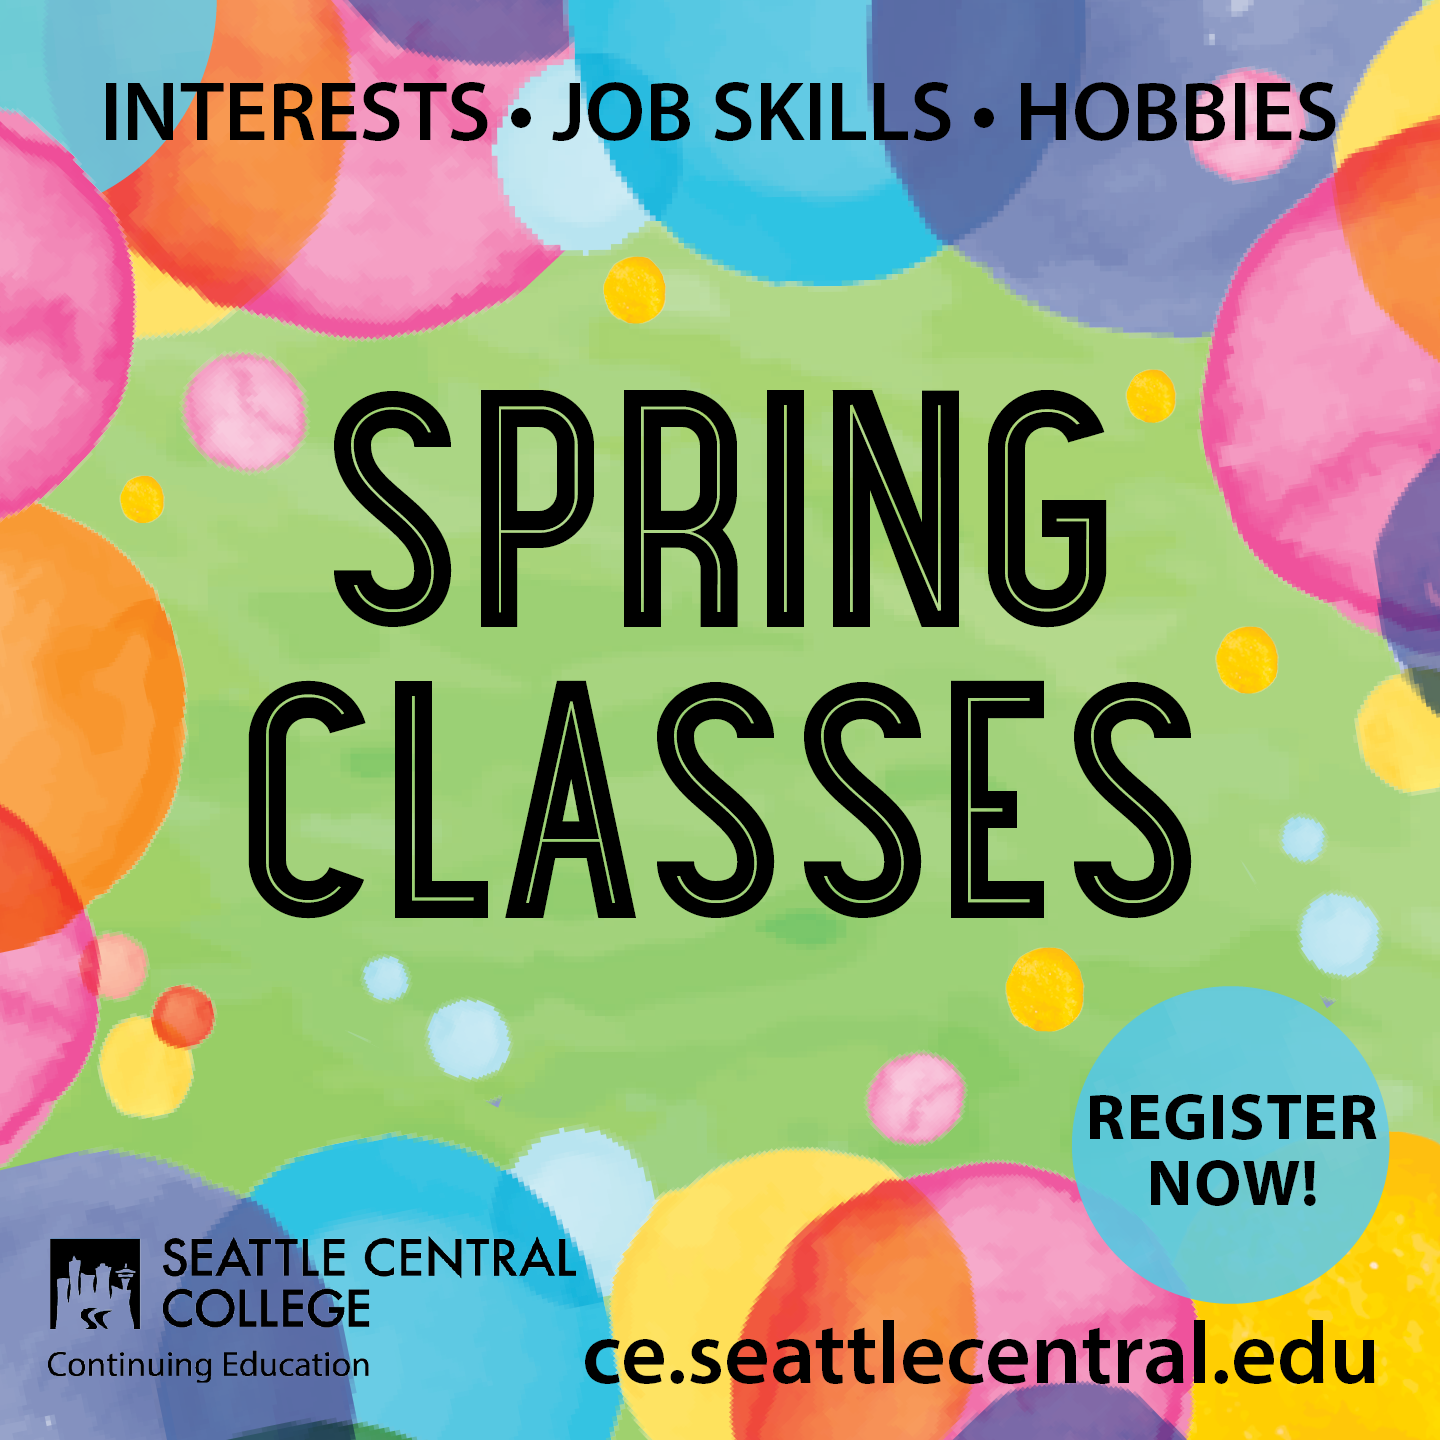 SPRING CLASSES - Register now! Interests, Job Skills, Hobbies - ce.seattlecentral.edu - light green background with large colorful circles around the border and smaller ones floating in the background - Continuing Education at Seattle Central College